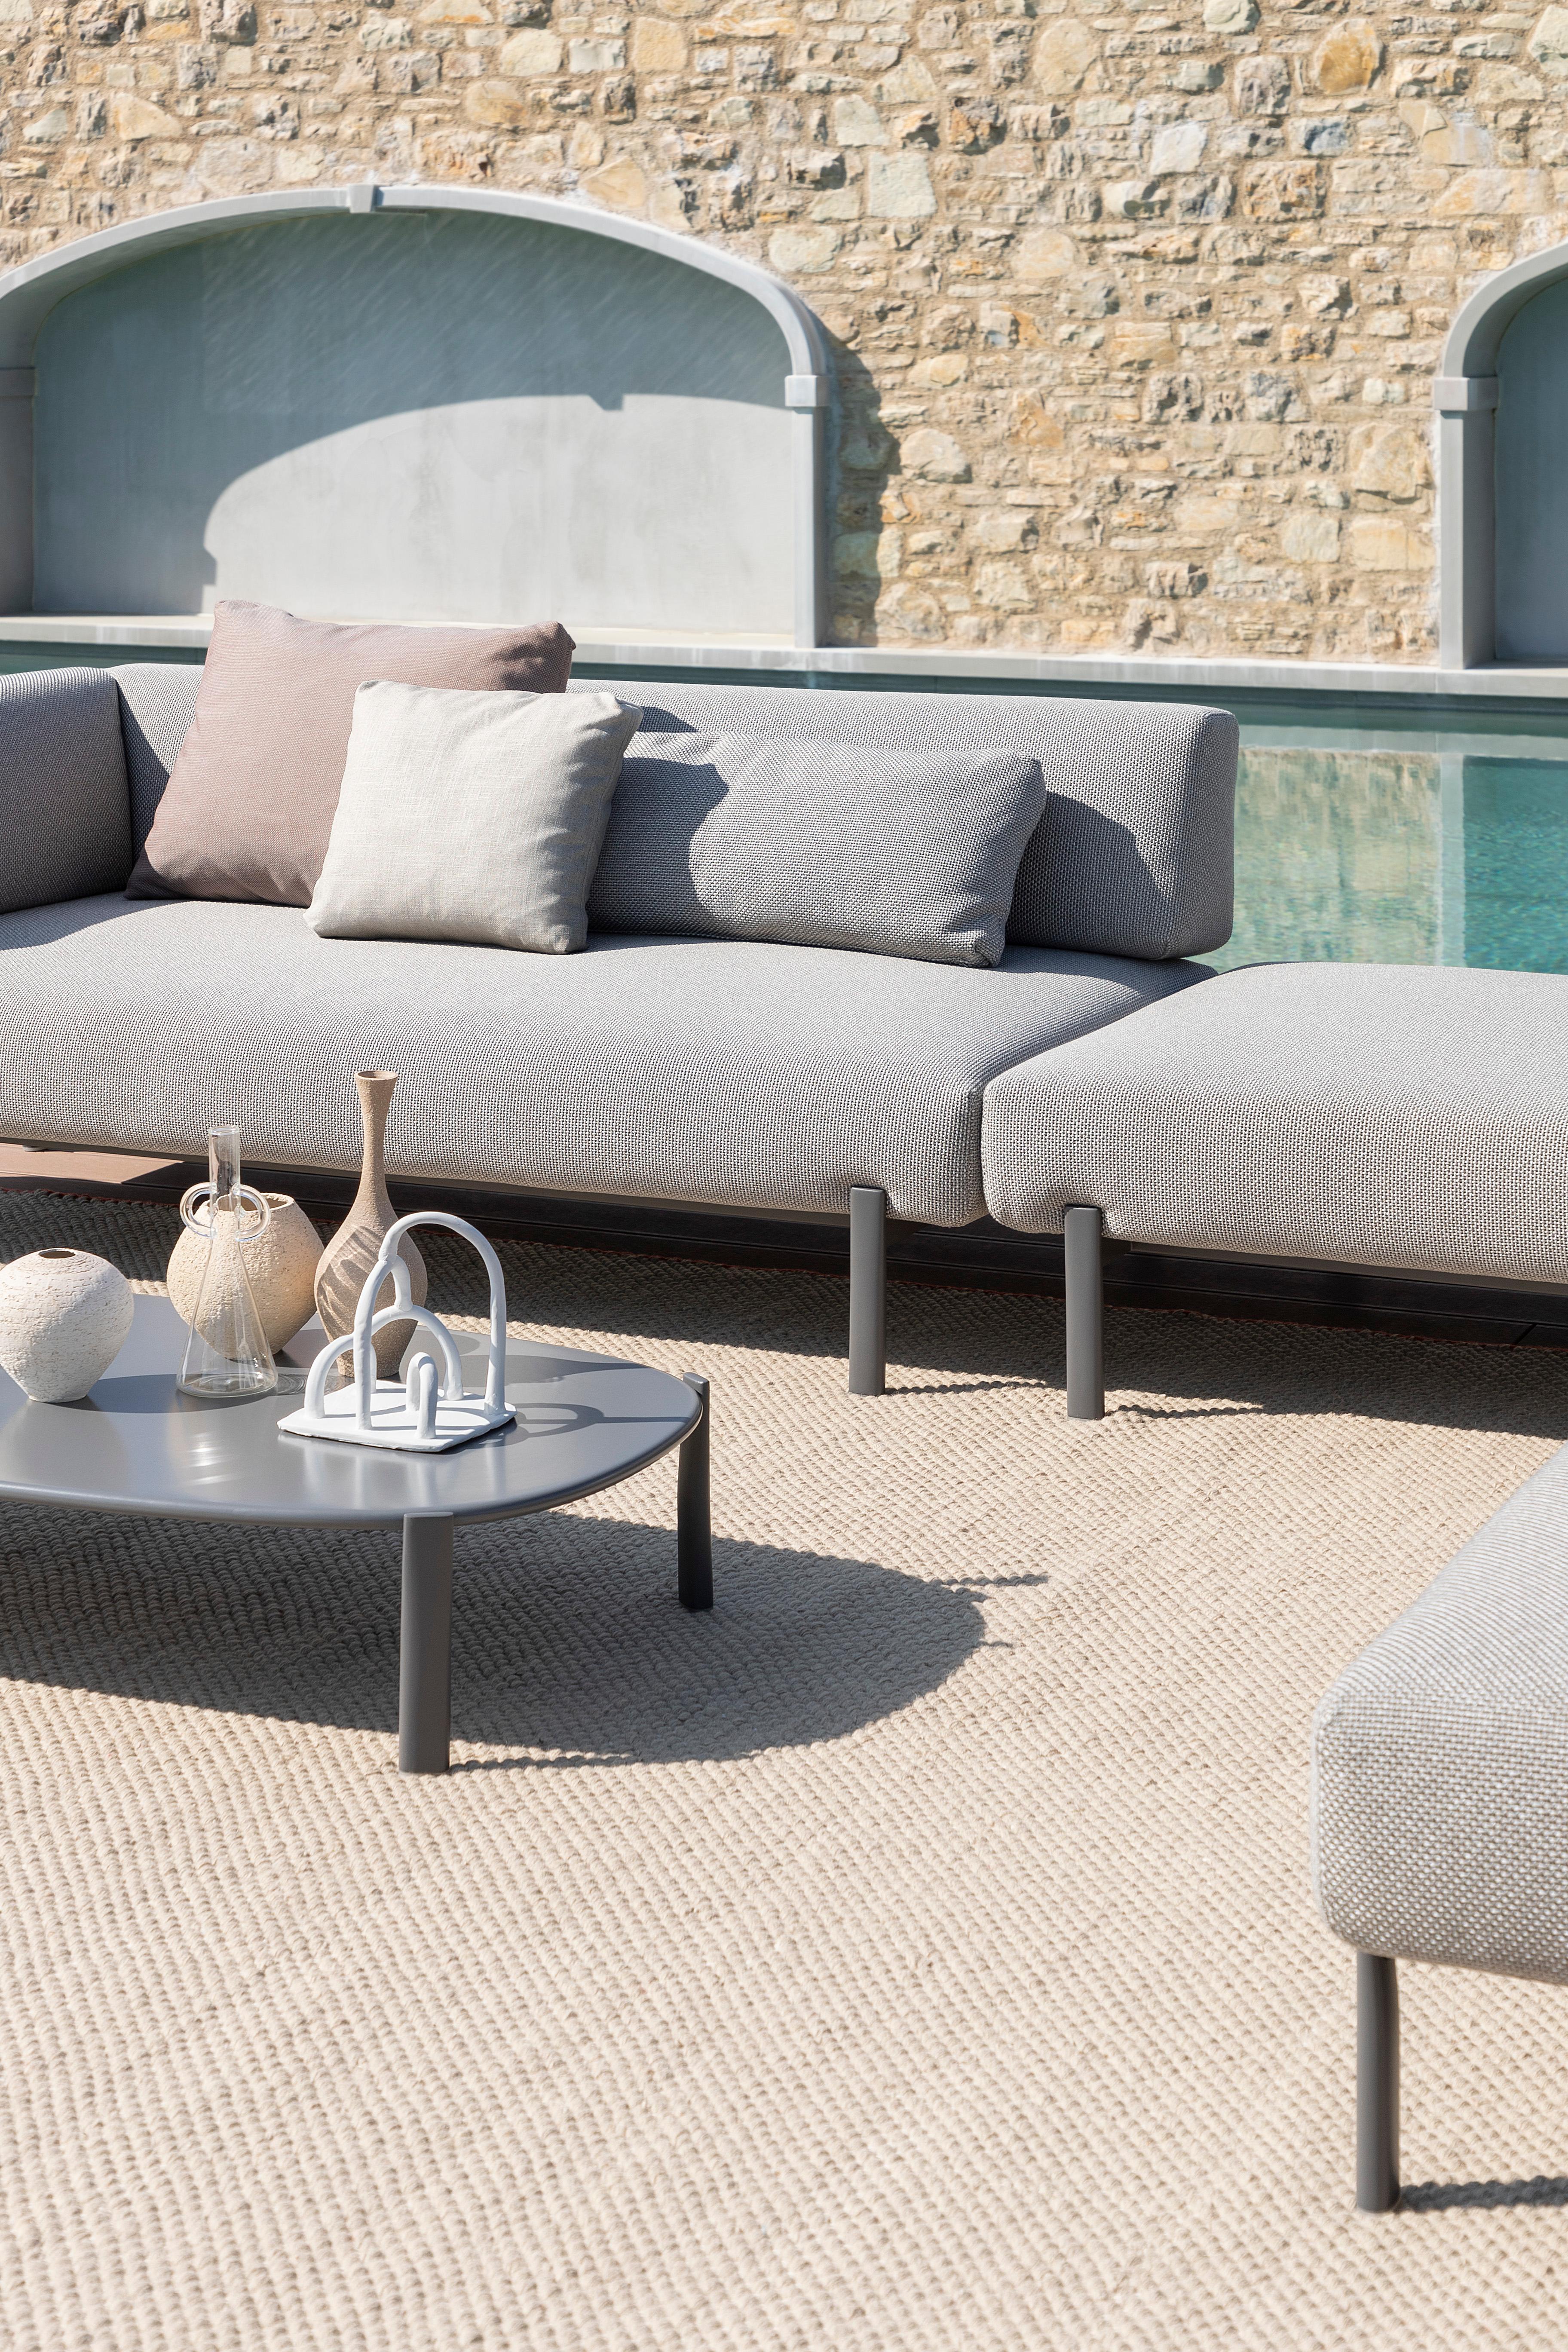 Alias T05_O DX Ten Angular Outdoor Sofa in Grey w Black Lacquered Aluminum Frame by PearsonLloyd

Modular corner element for outdoor use with lacquered die-cast aluminium legs and stainless steel frame.Seat, back and armrest with removable cover